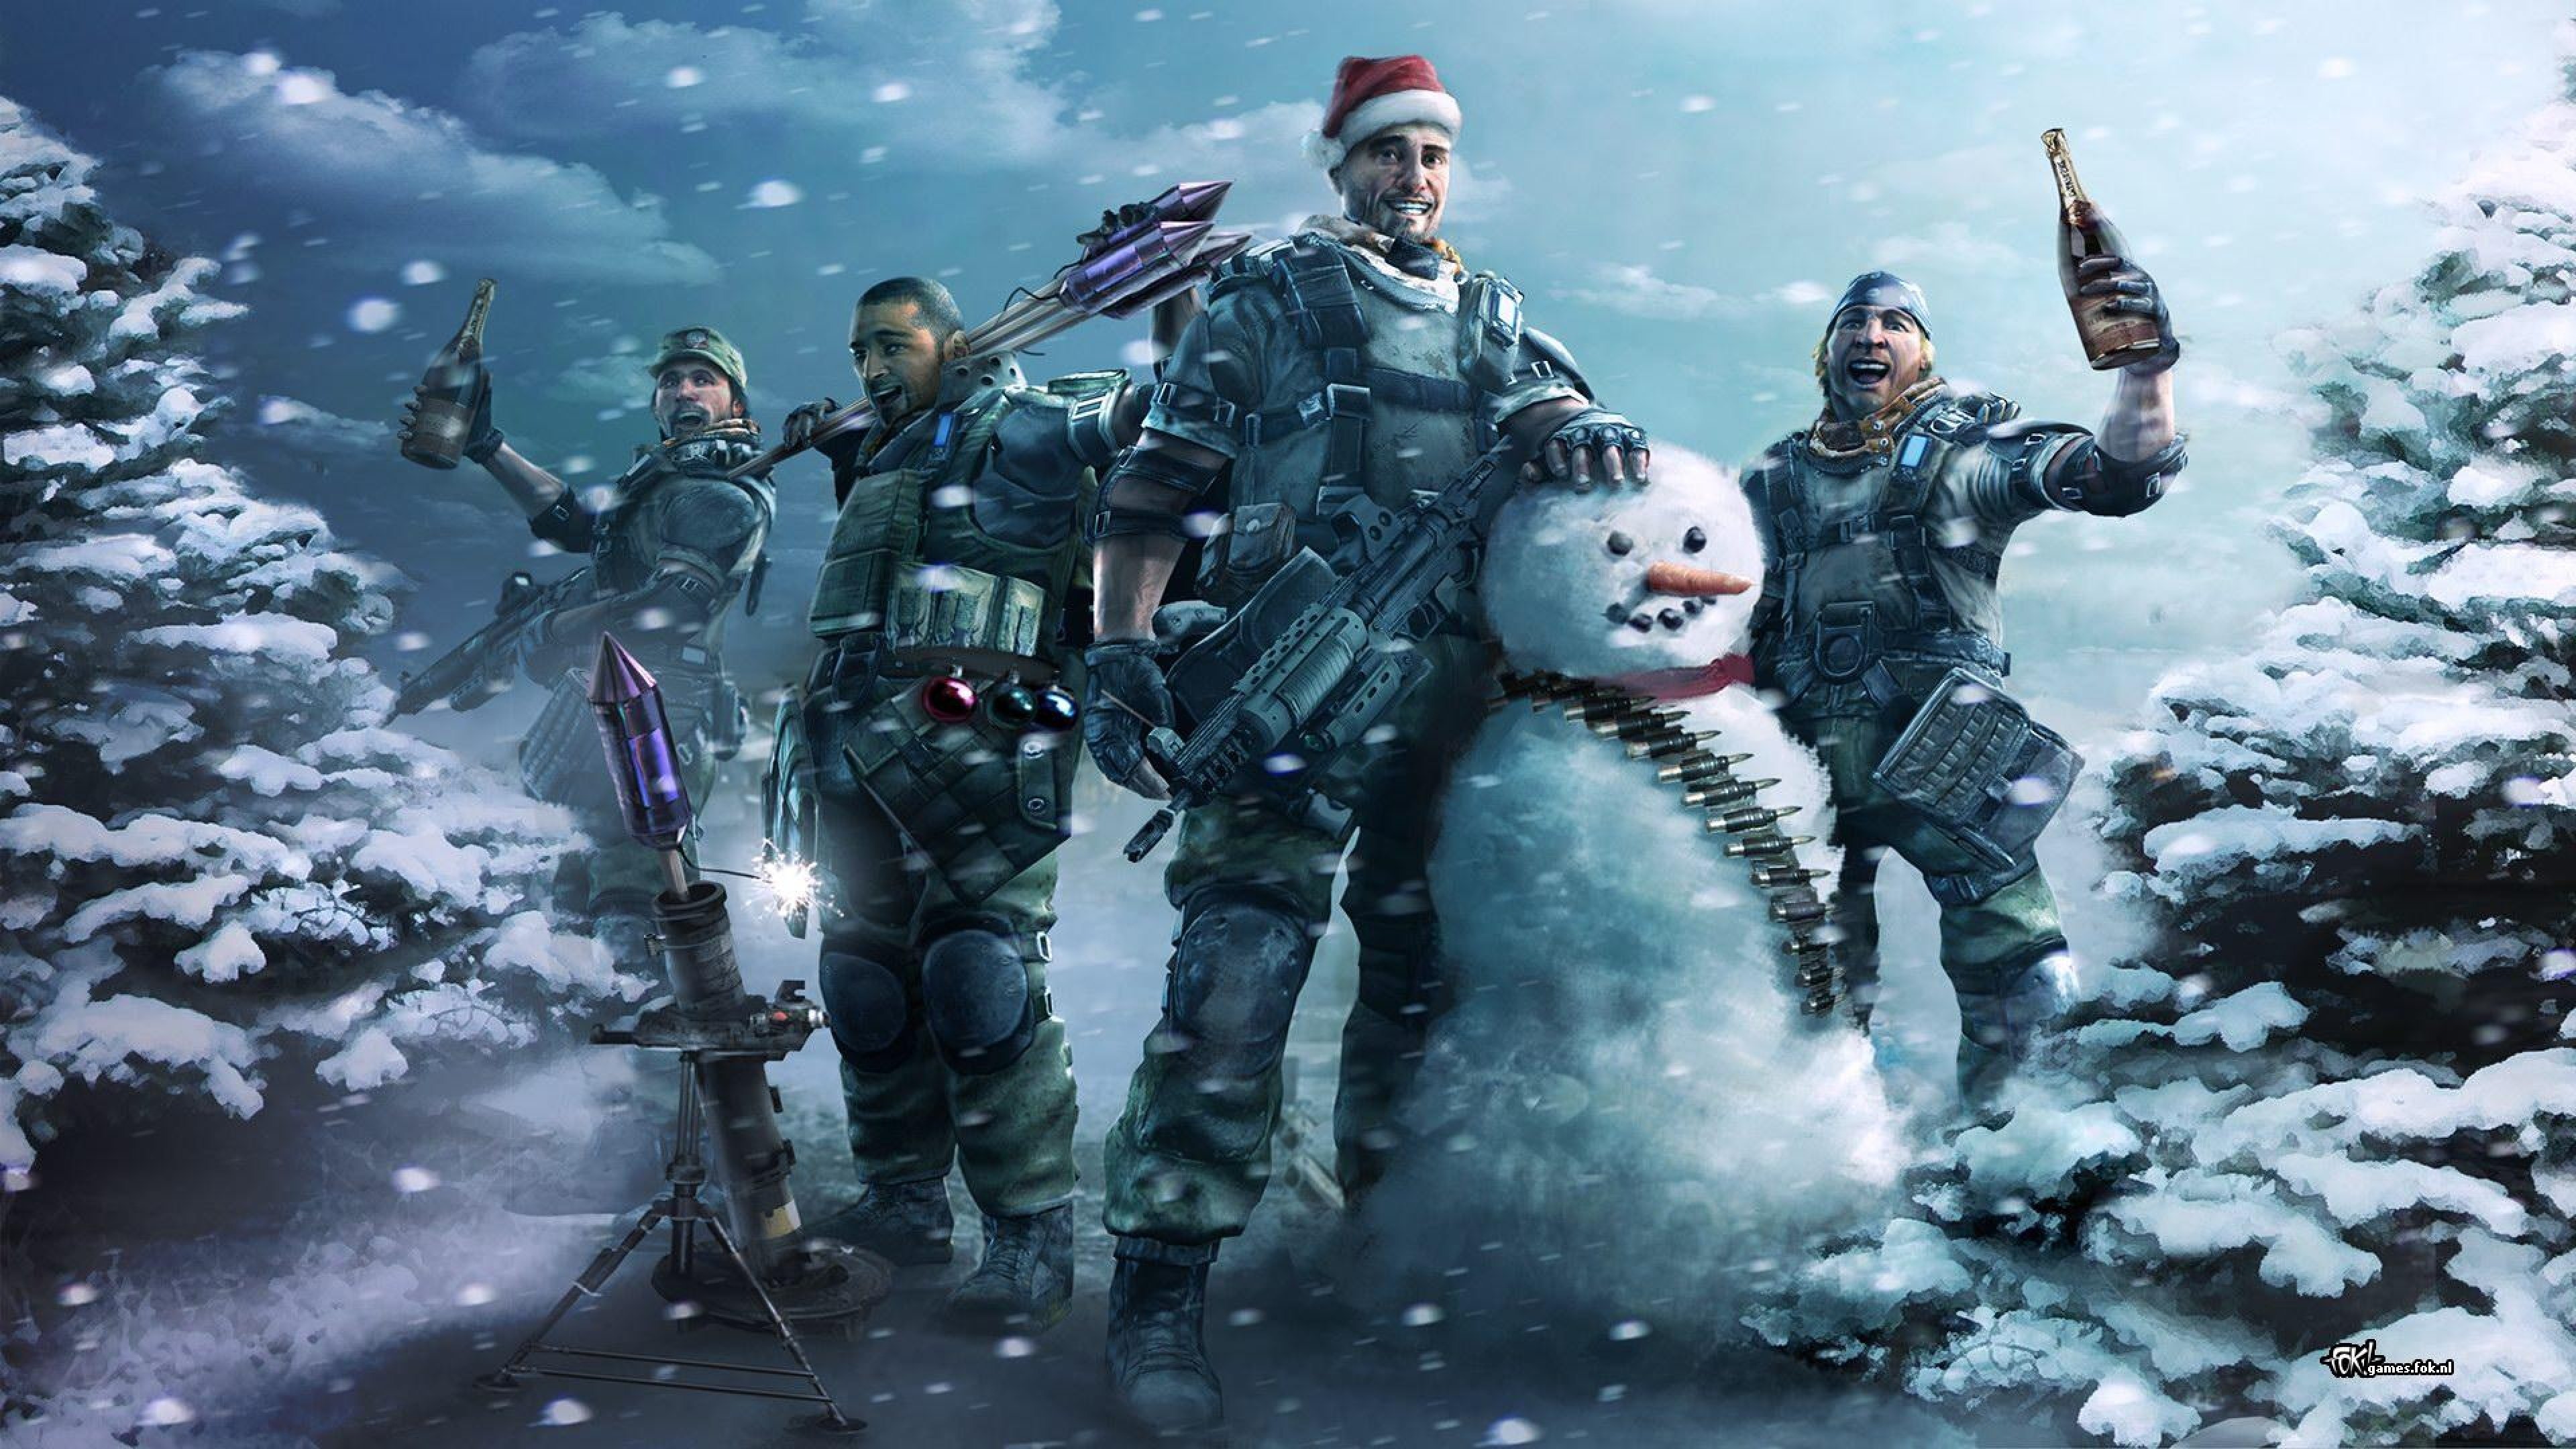 killzone, Stealth, Tactical, Warrior, Sci fi, Futuristic, Shooter, Action, Fighting, Christmas Wallpaper